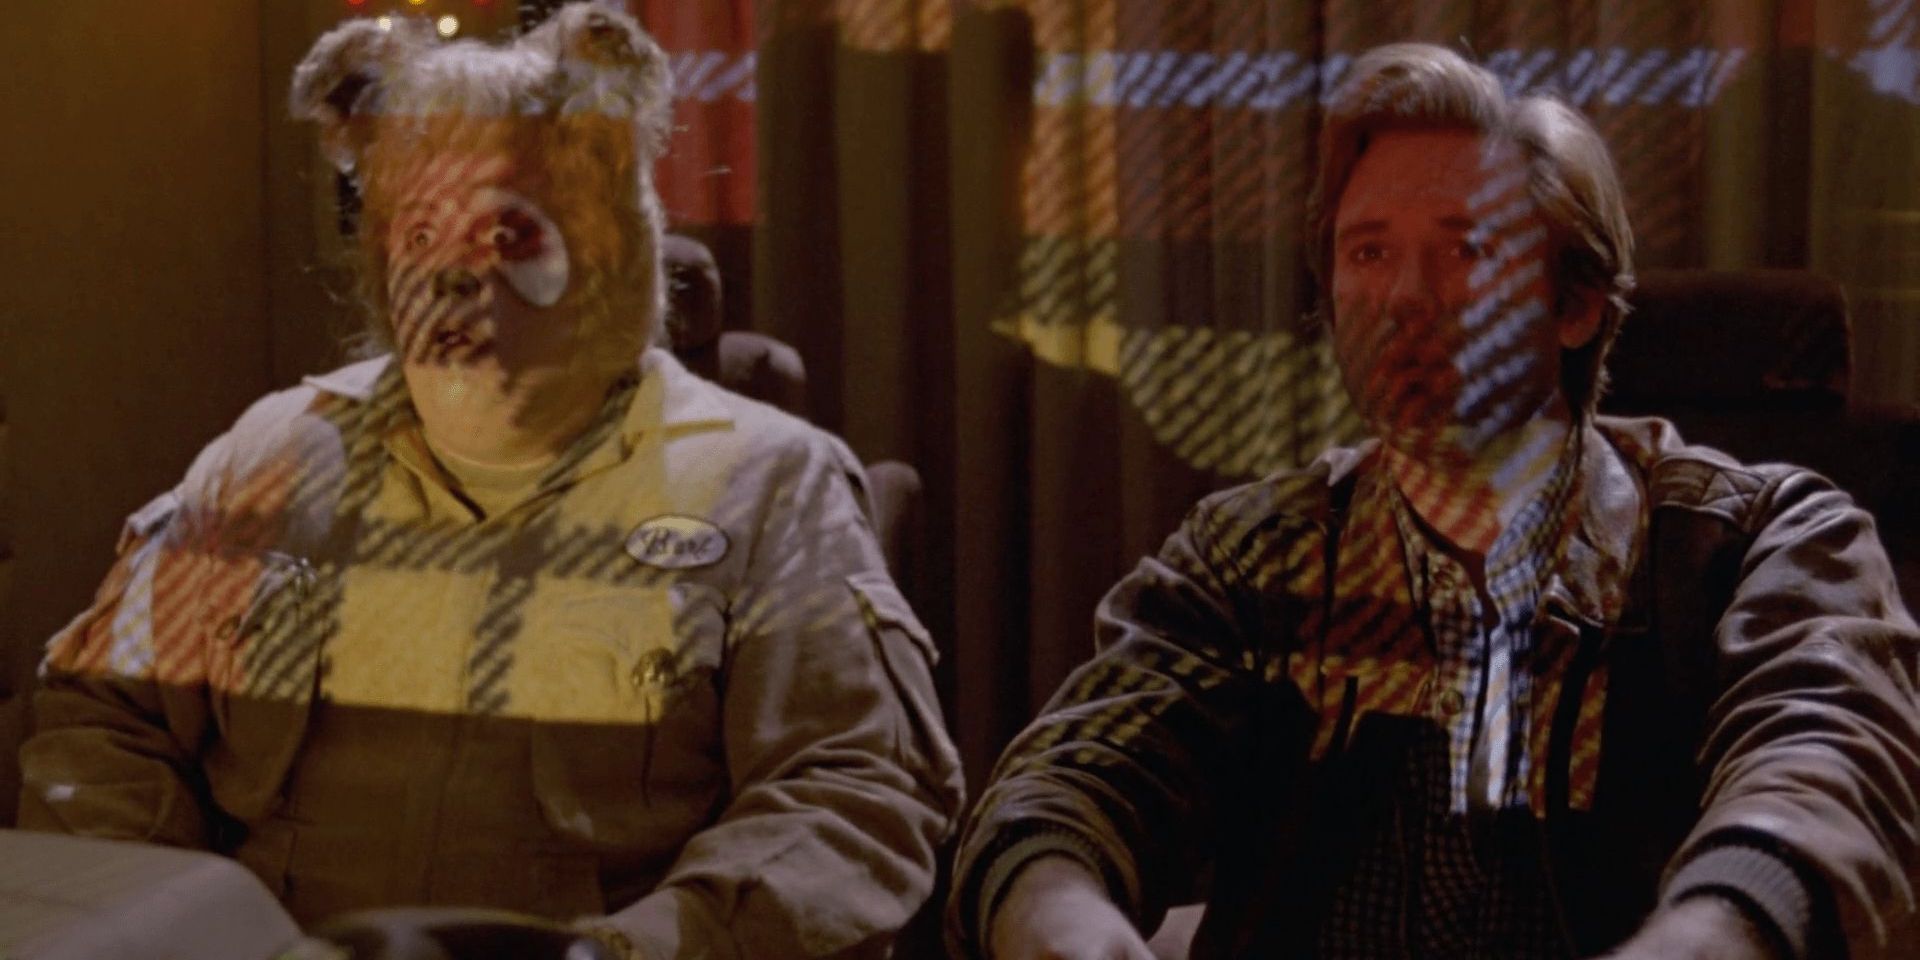 Barf and Lone Starr covered in plaid in Spaceballs